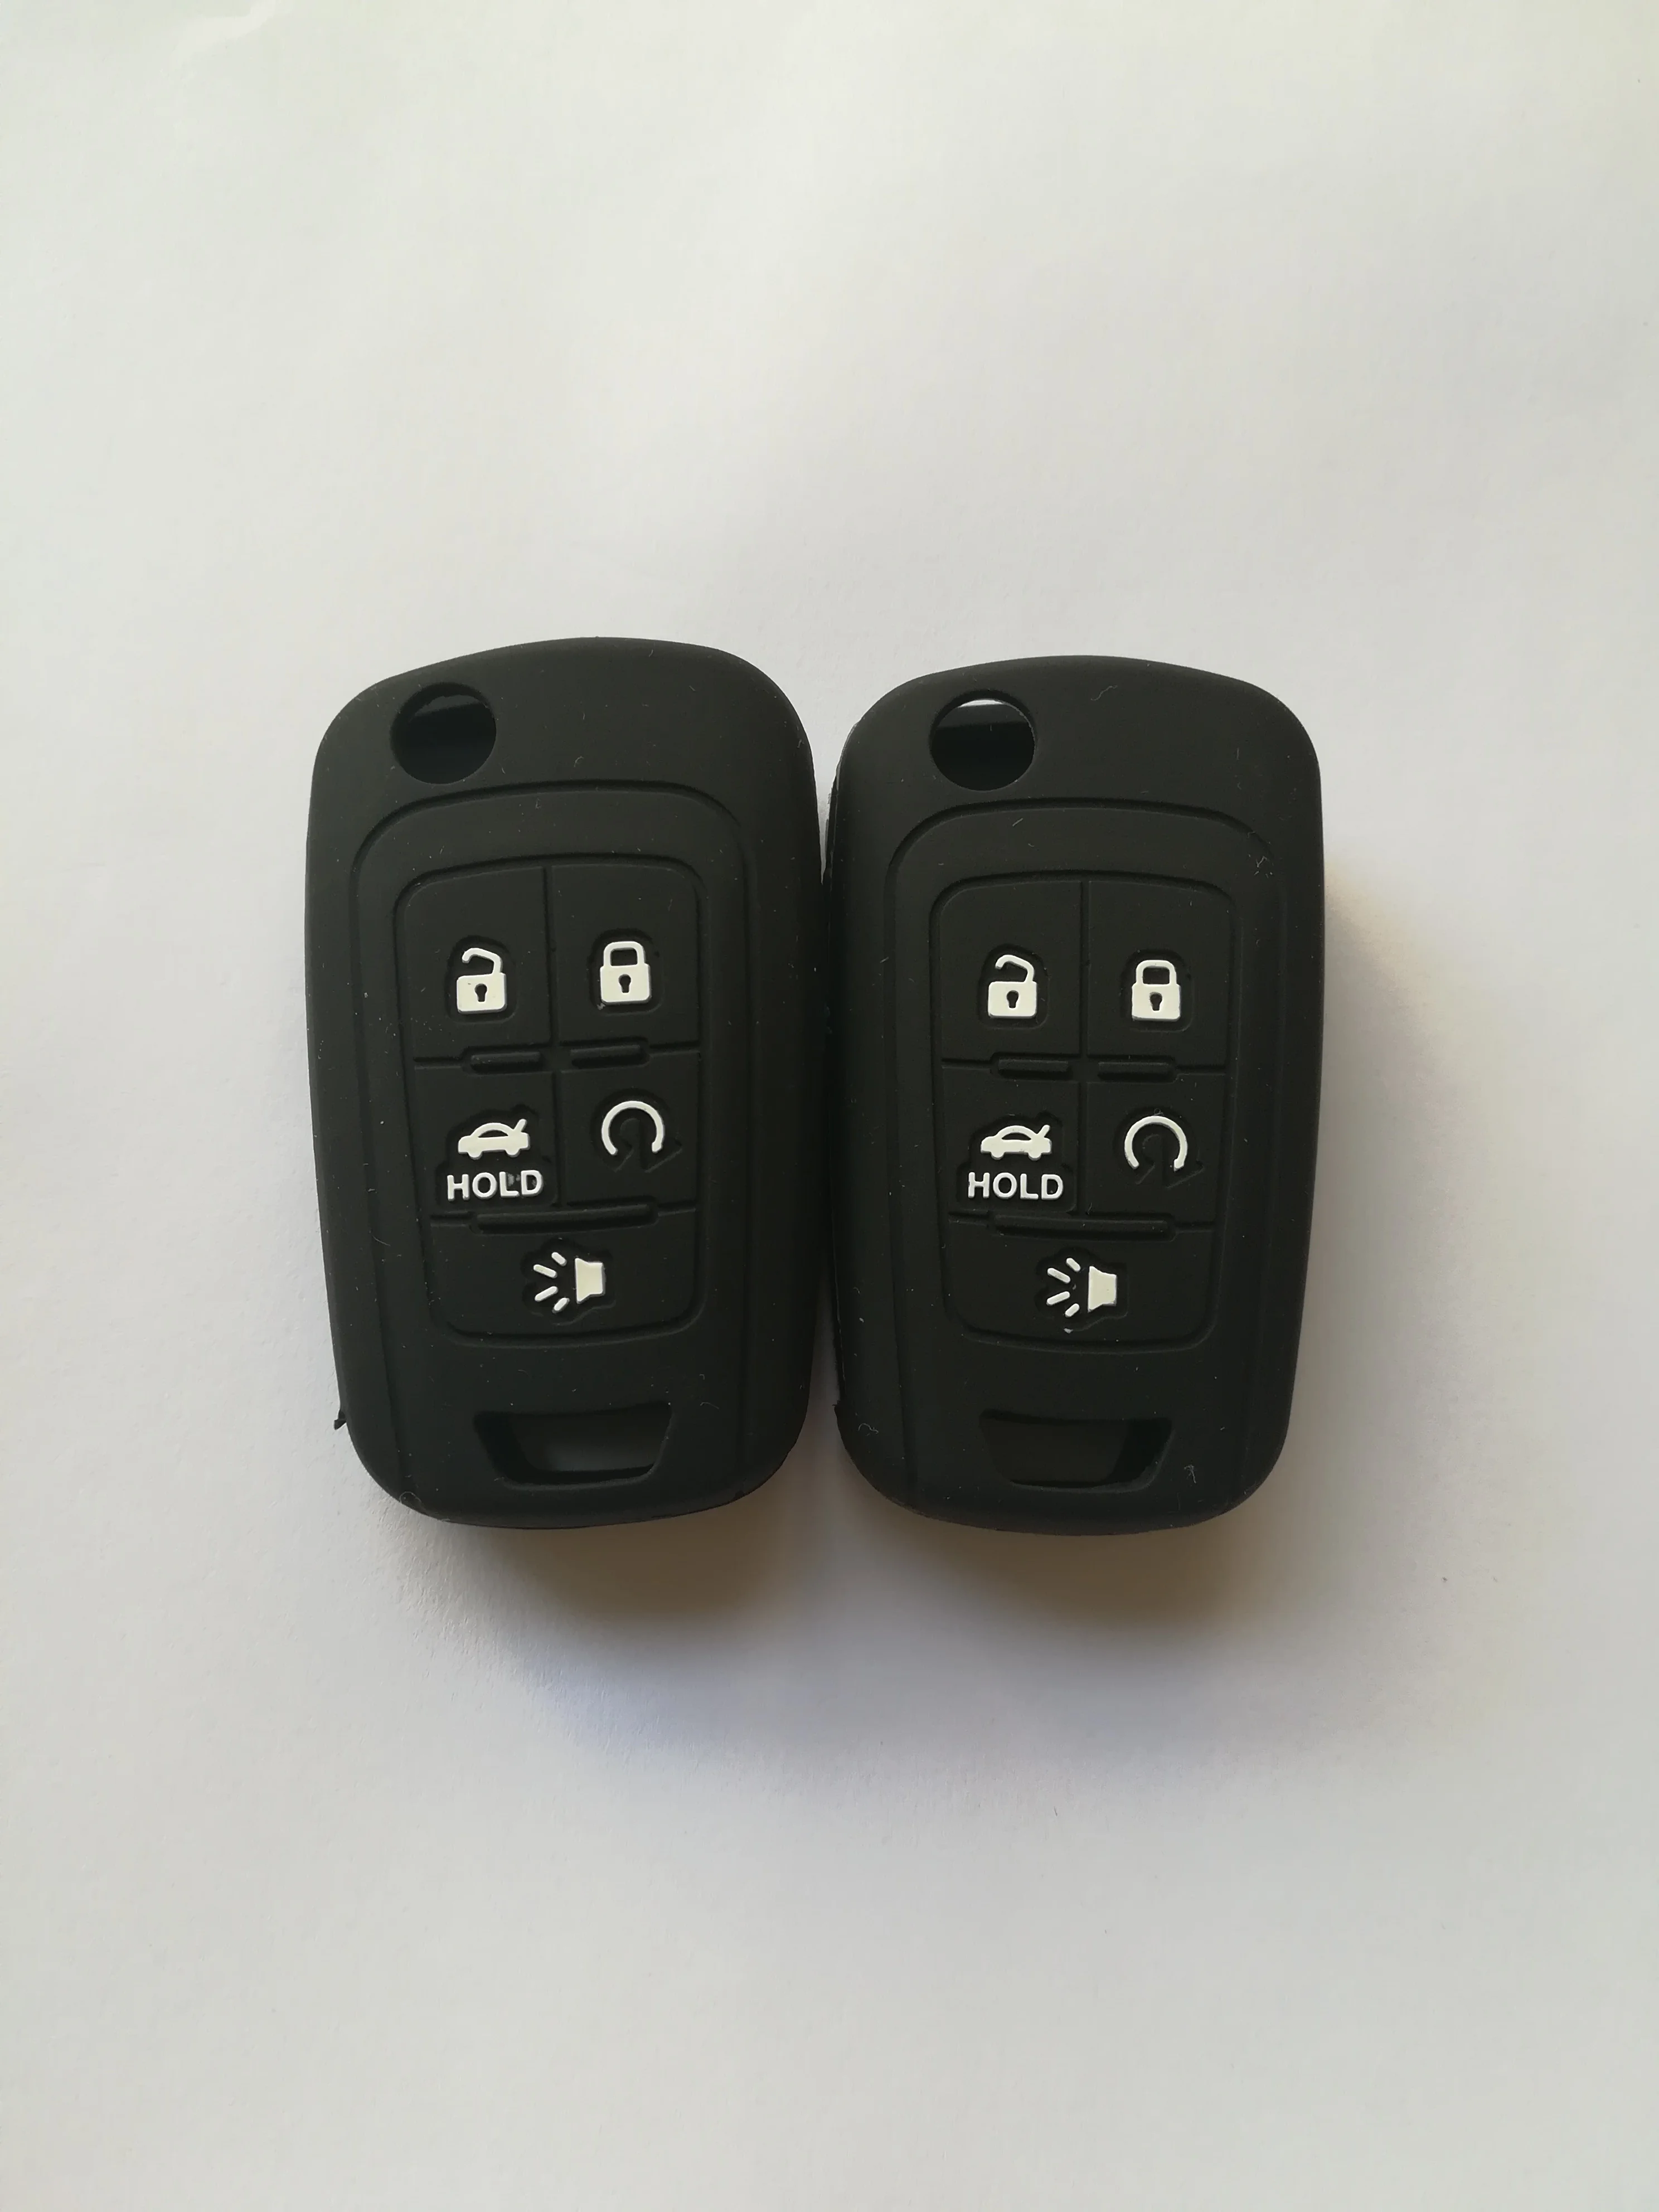 

for Chevrolet Key Case cover protector keyless car accessories for Chevrolet Cruze Volt Spark Sonic Aveo OHT01060512 Camaro 2pcs